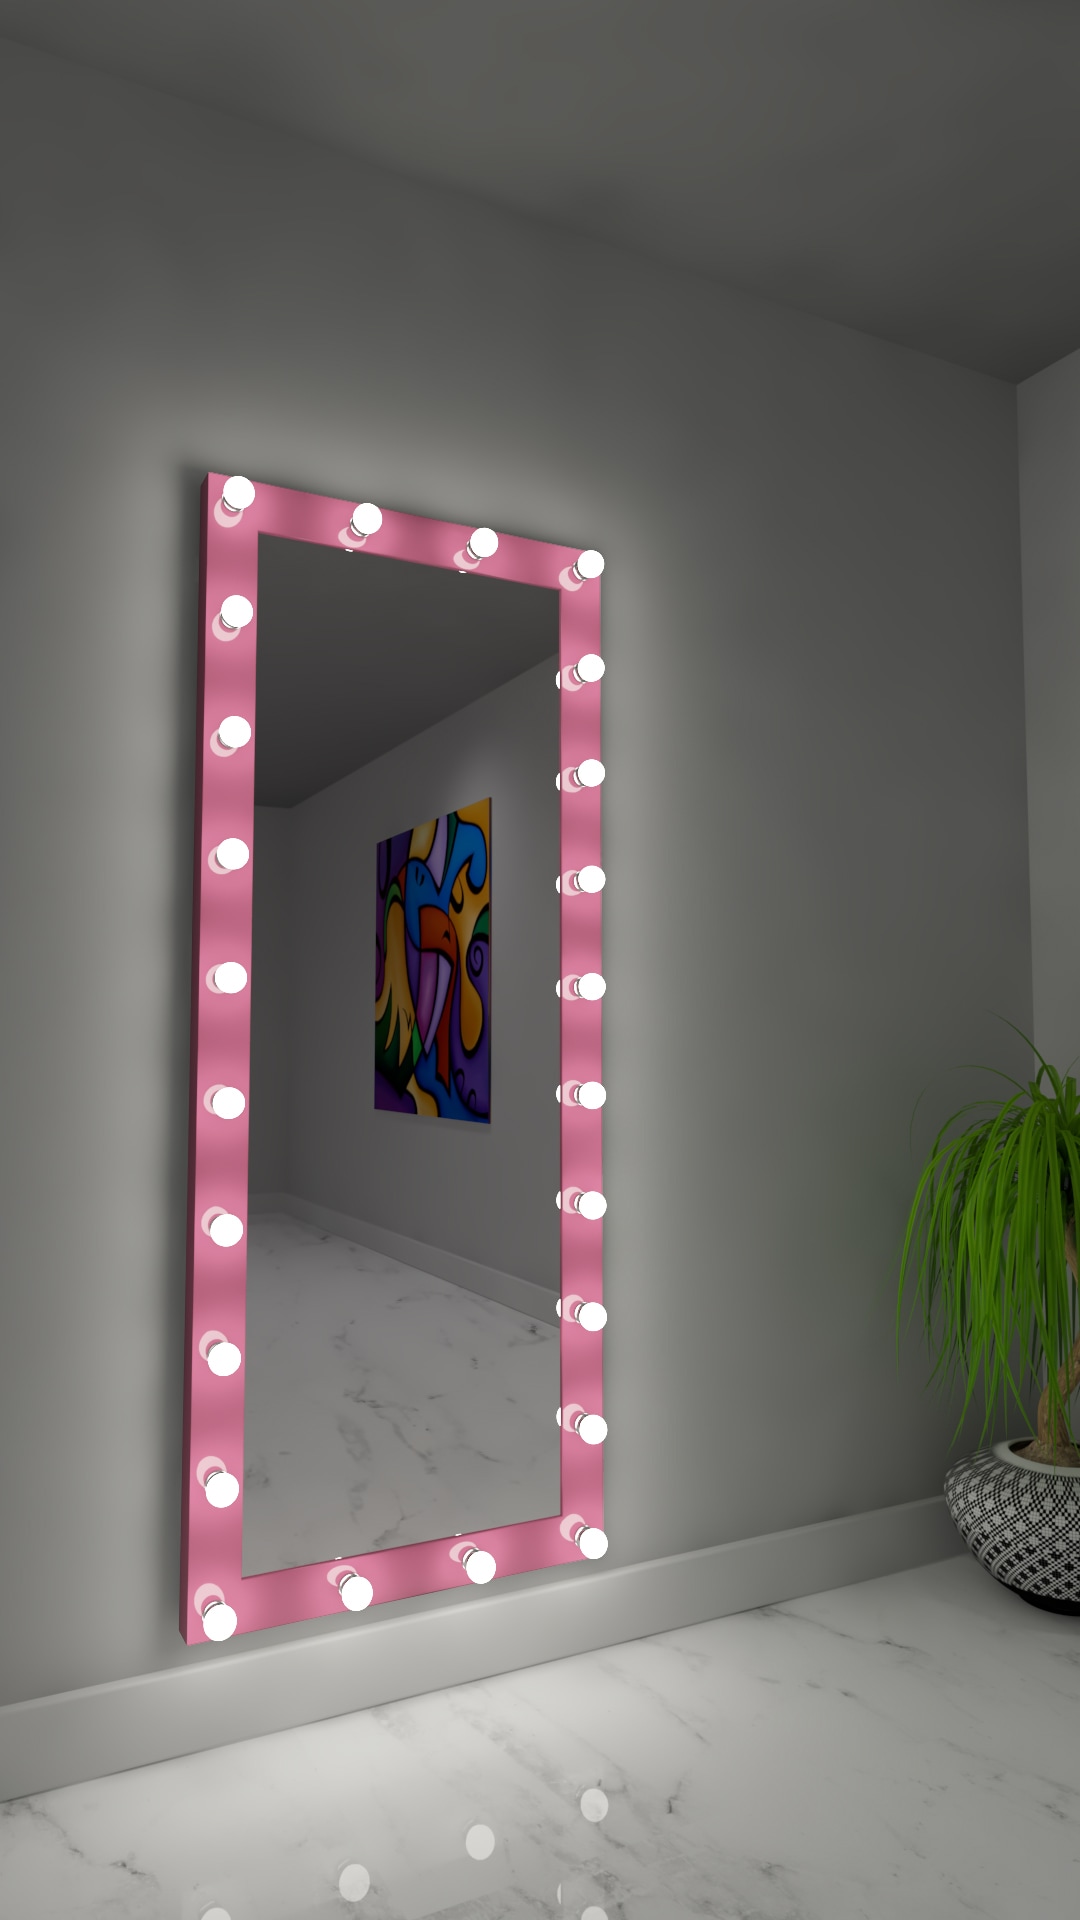 PARIS MIRROR x 70-in H LED Lighted 6000K Rectangular Framed Bathroom Vanity Mirror in the Bathroom Mirrors department at Lowes.com